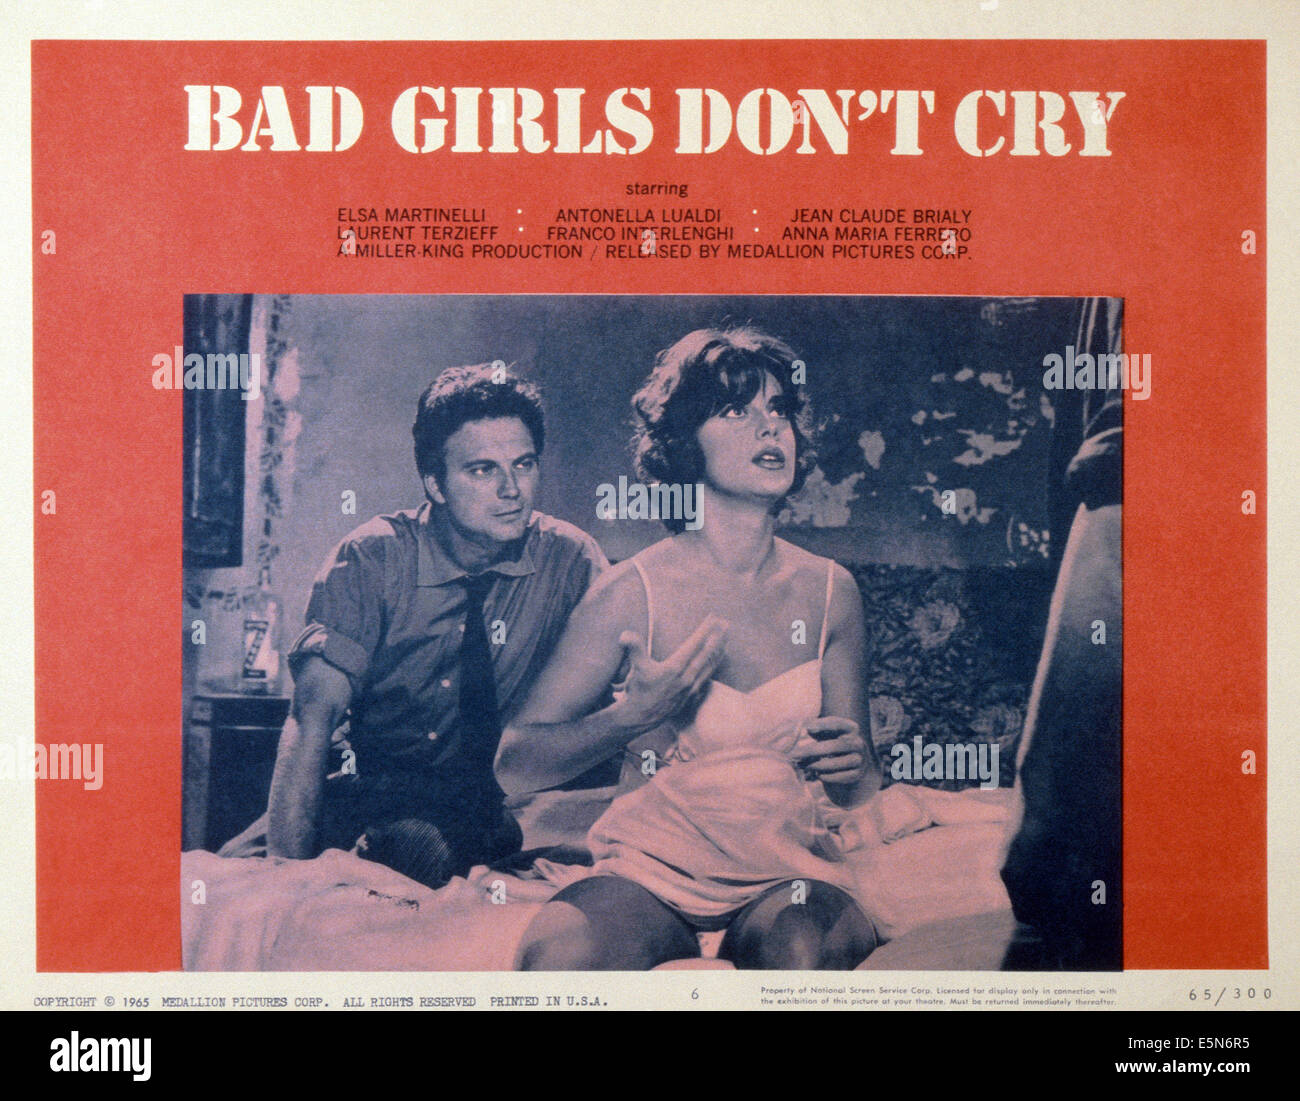 BAD GIRLS DON'T CRY, (aka THE BIG NIGHT aka LA NOTTE BRAVA), from left: Jean-Claude Brialy, Elsa Martinelli, 1962 released in US Stock Photo